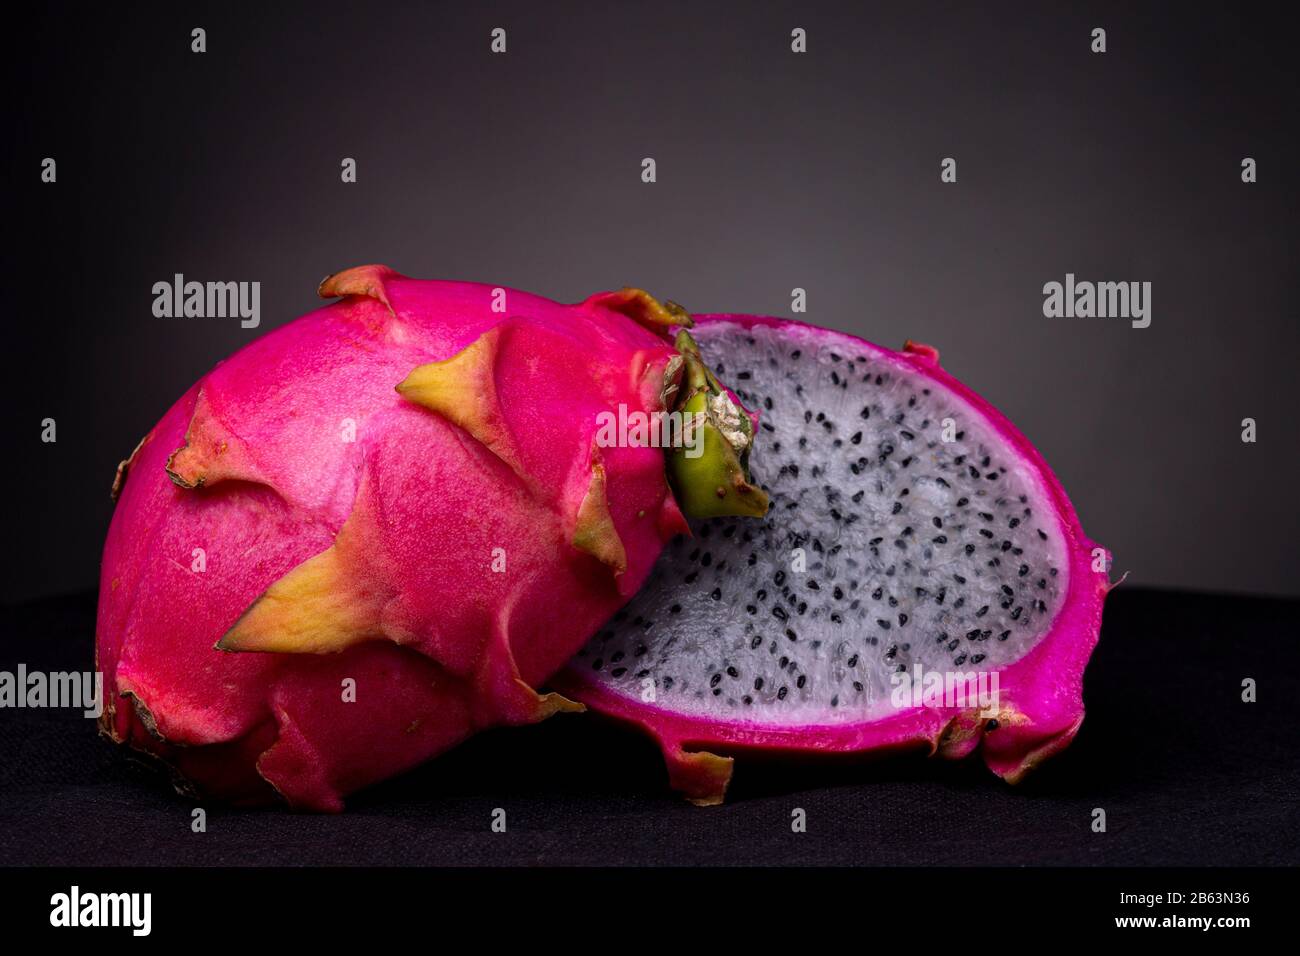 Two halves of white-fleshed Pitaya or Dragon fruit with the outer pink magenta scaly outer shell and white pulp with black seeds insides Stock Photo